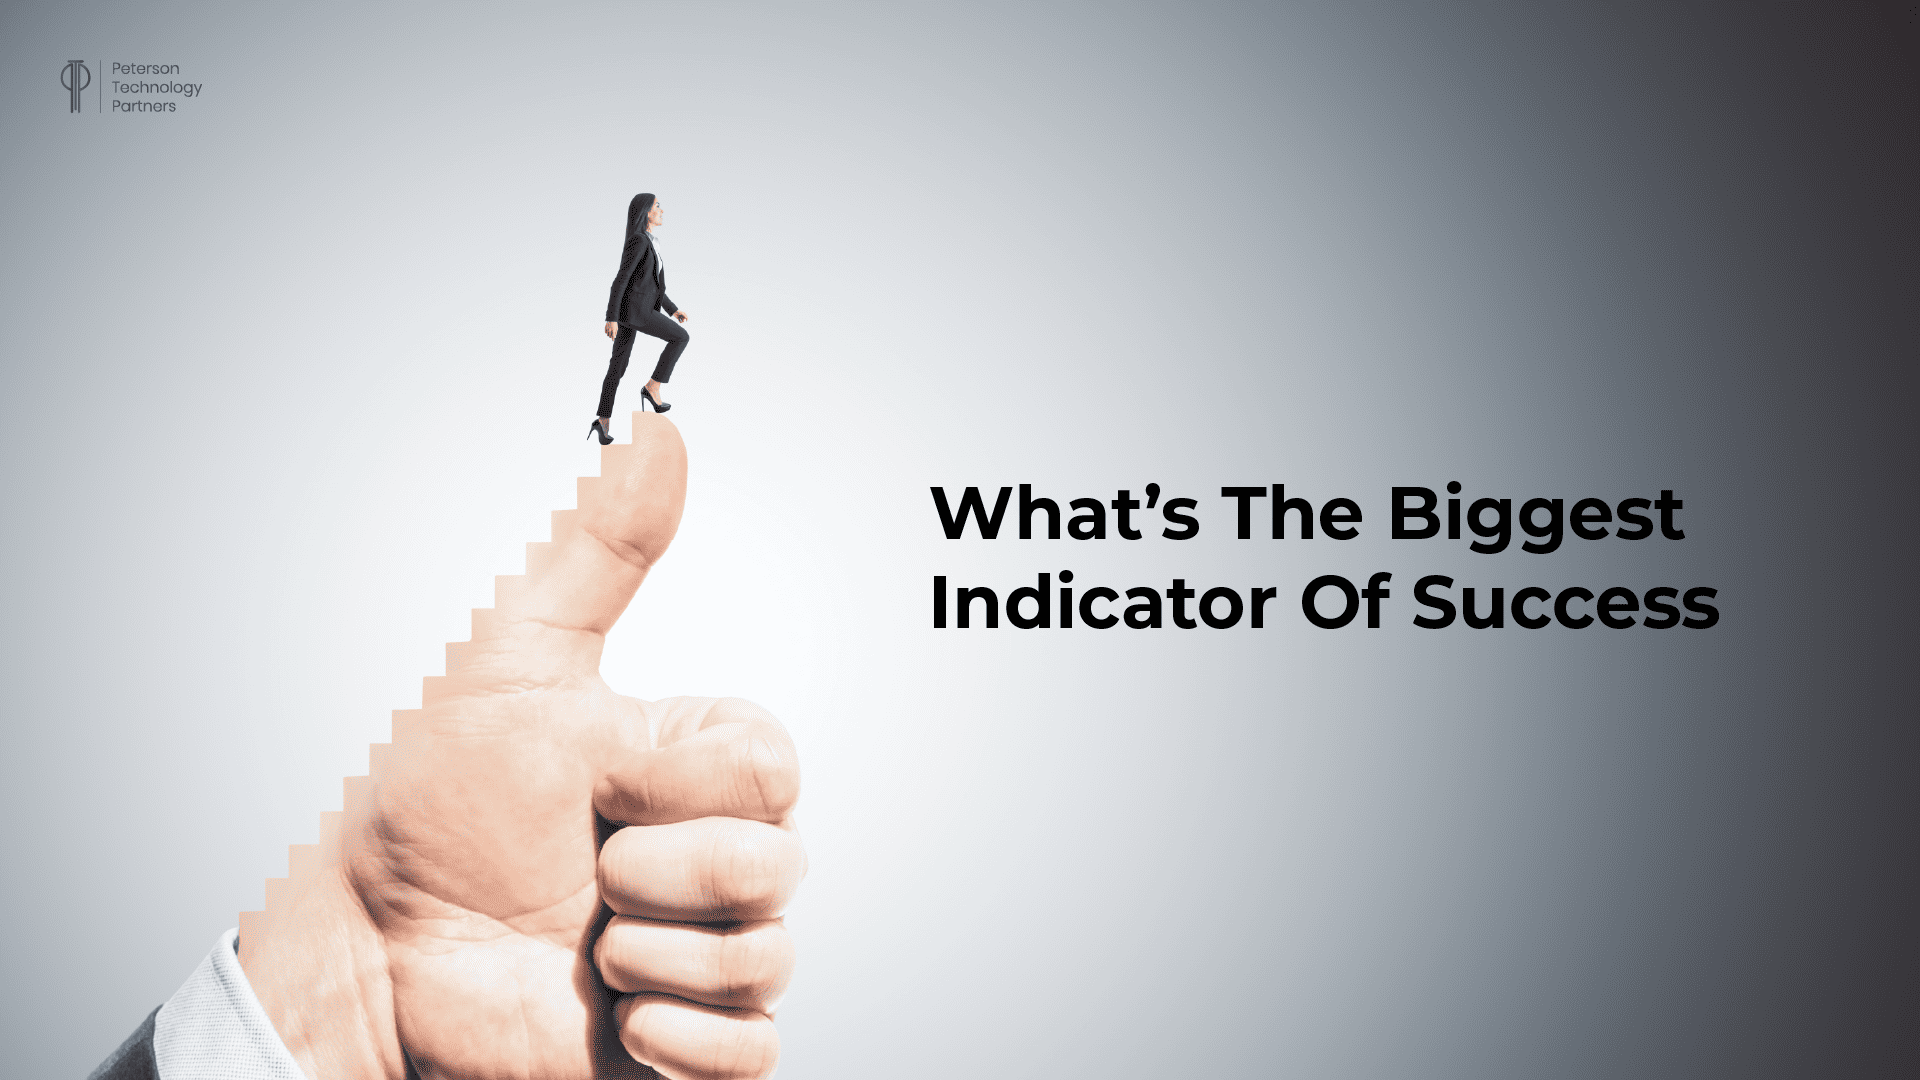 What’s the Biggest Indicator of Success?